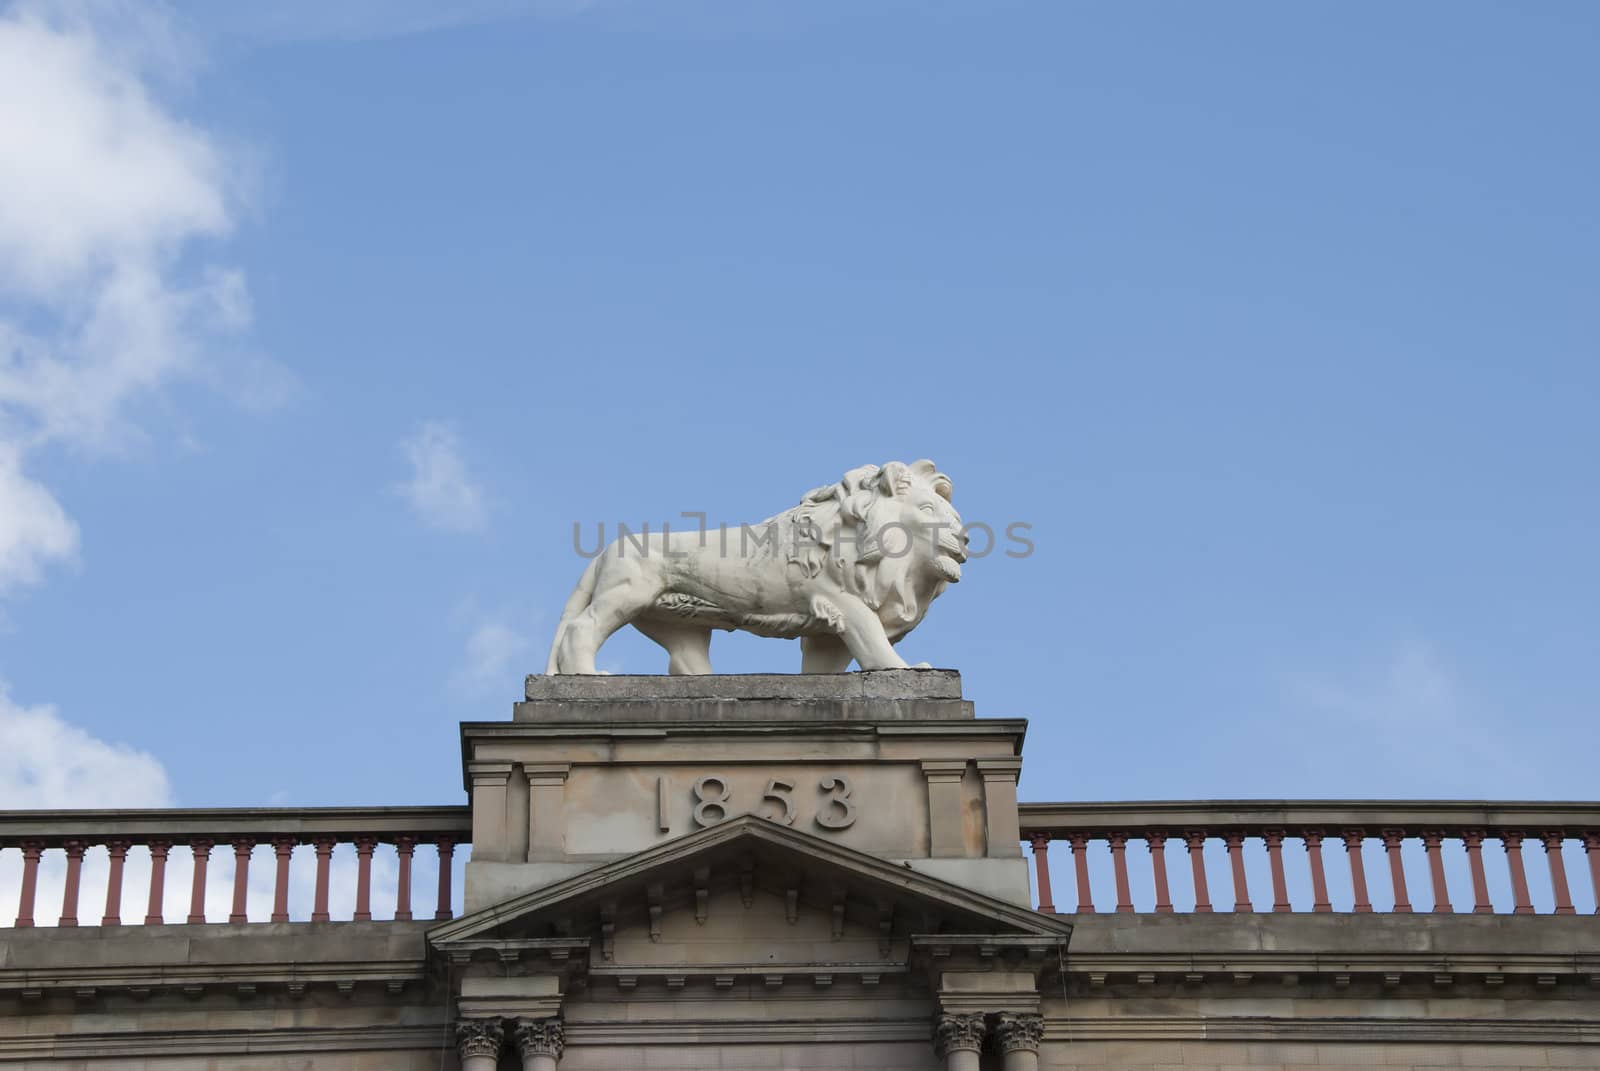 Statue of a White Lion on top of a Victorian Building signifying pride and achievement